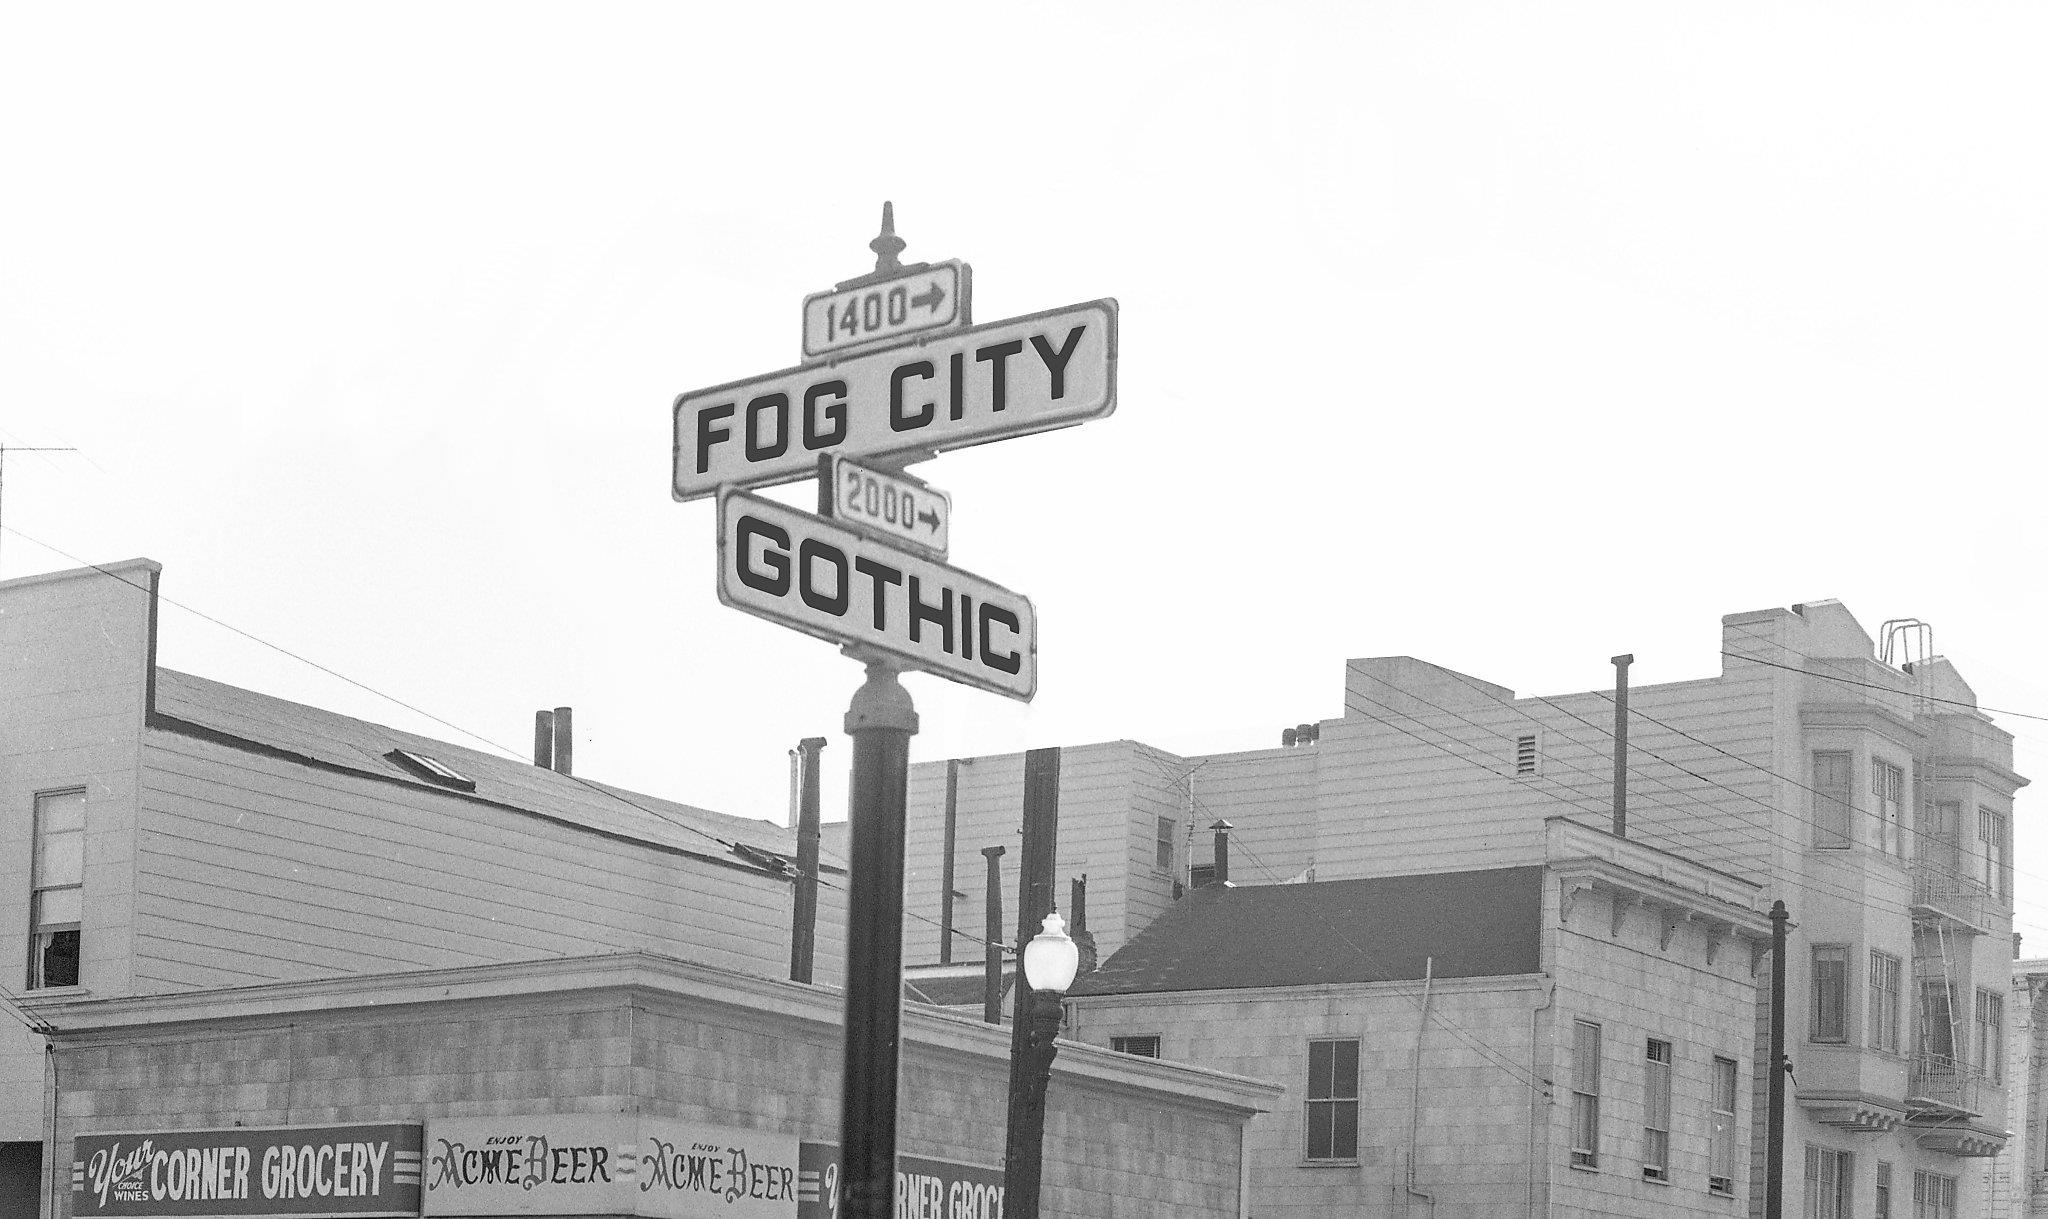 San Francisco finally has its own font. And the inspiration was truly  historic